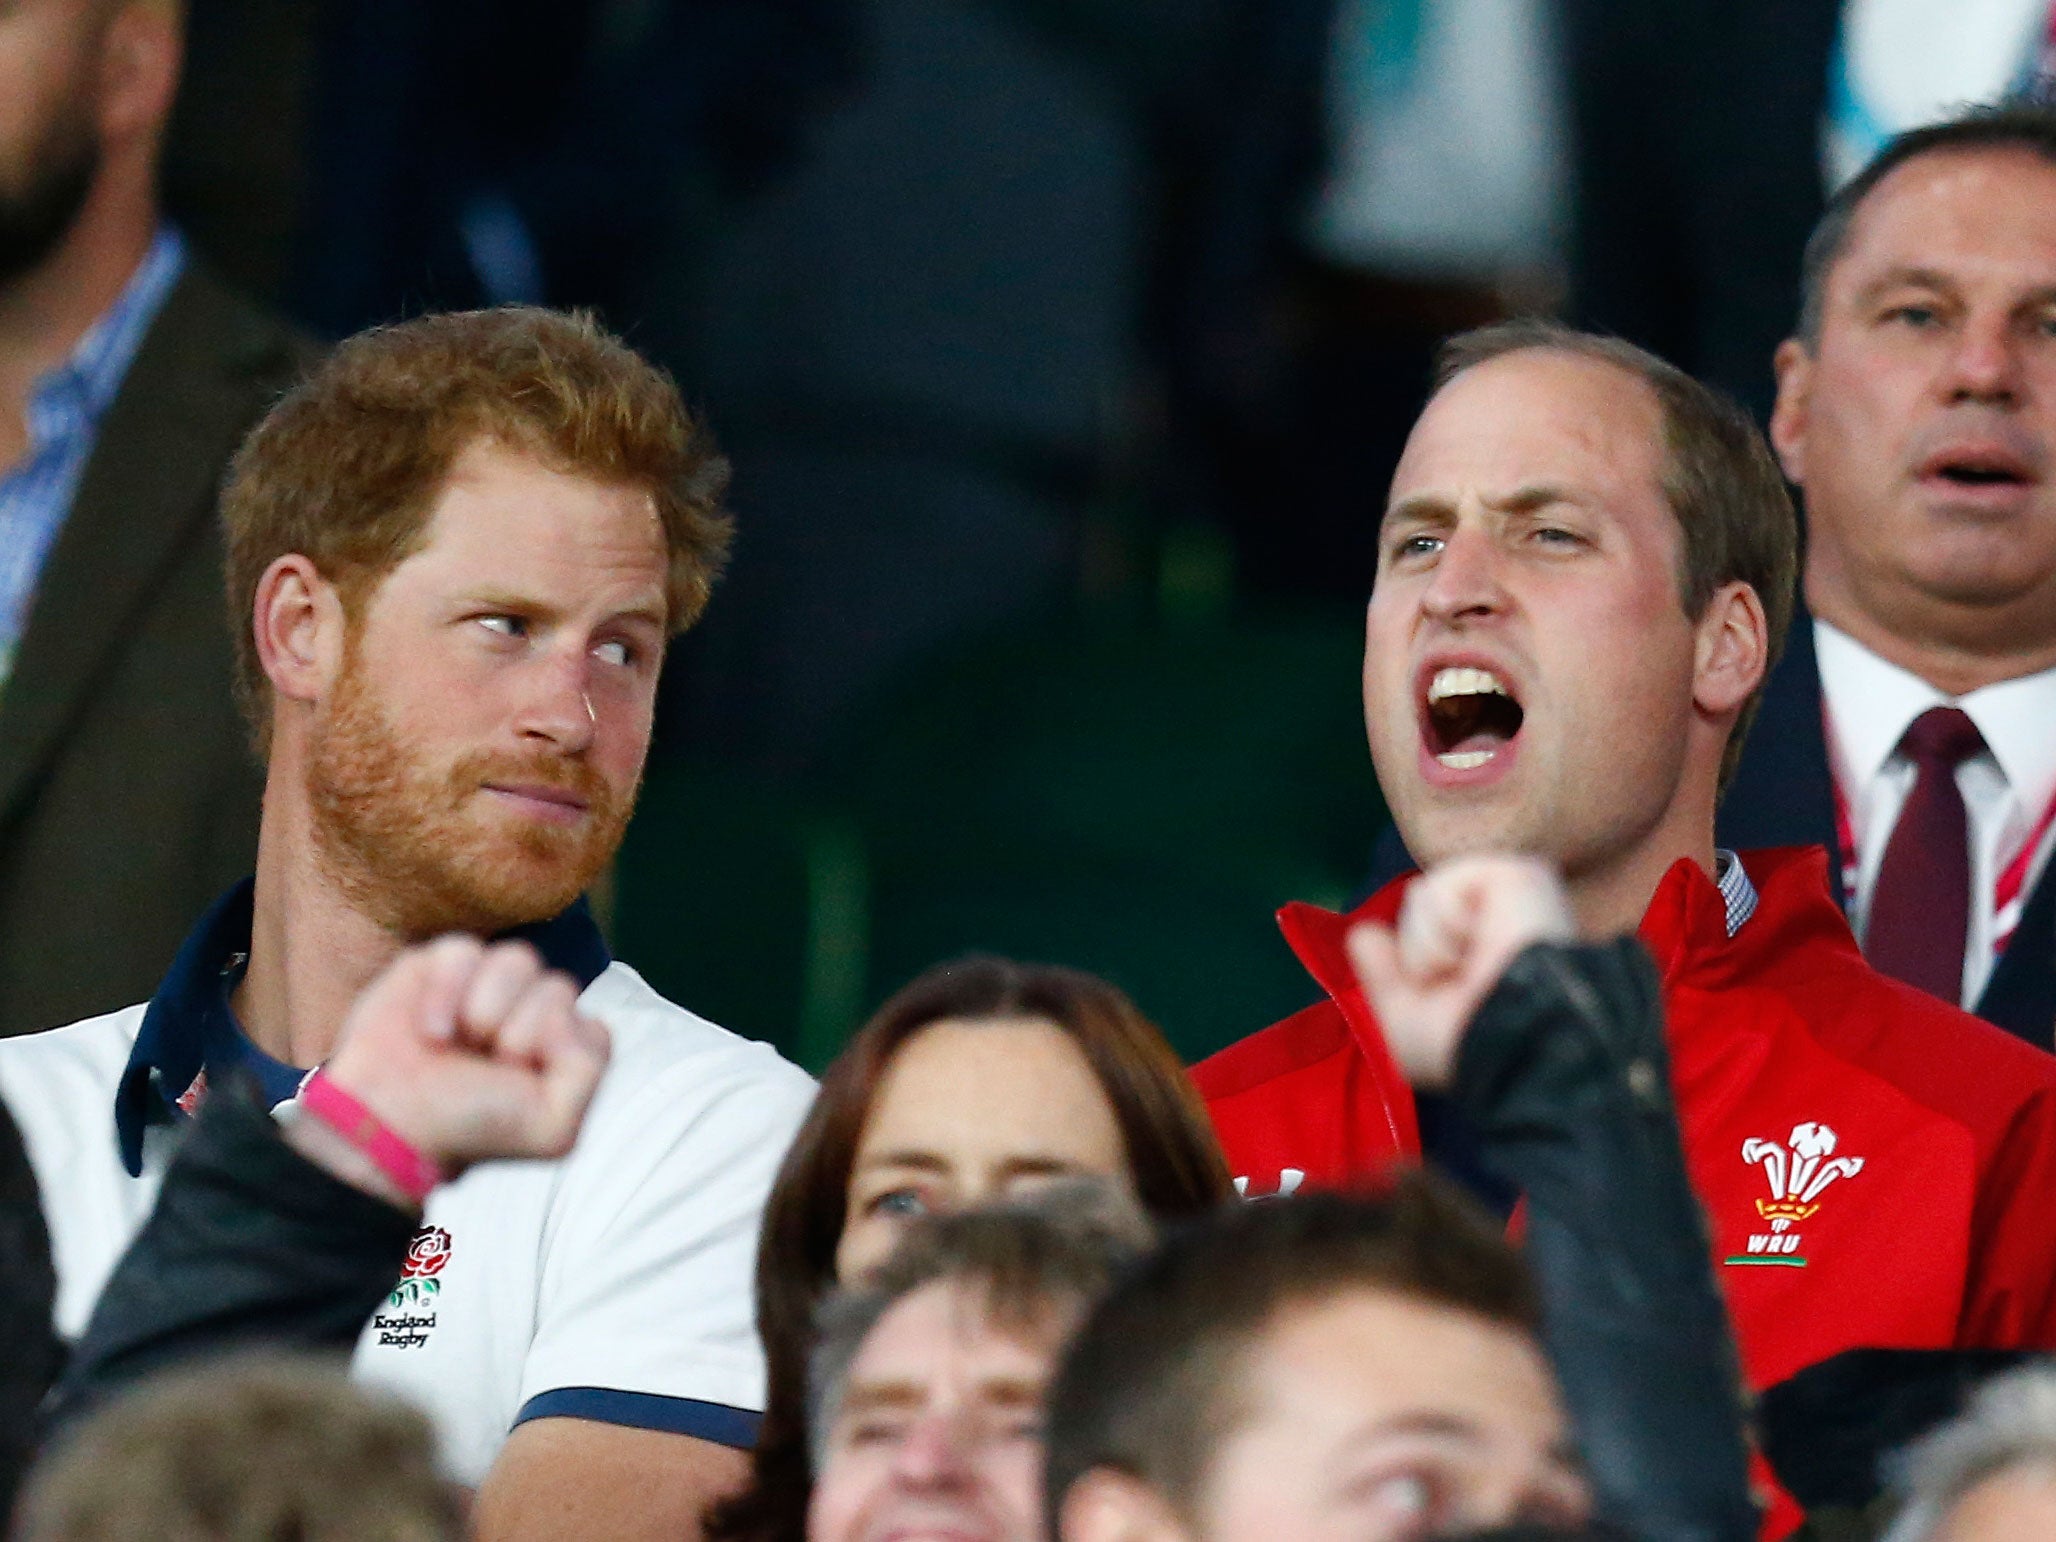 Prince Harry seemed unimpressed with Prince William during the match